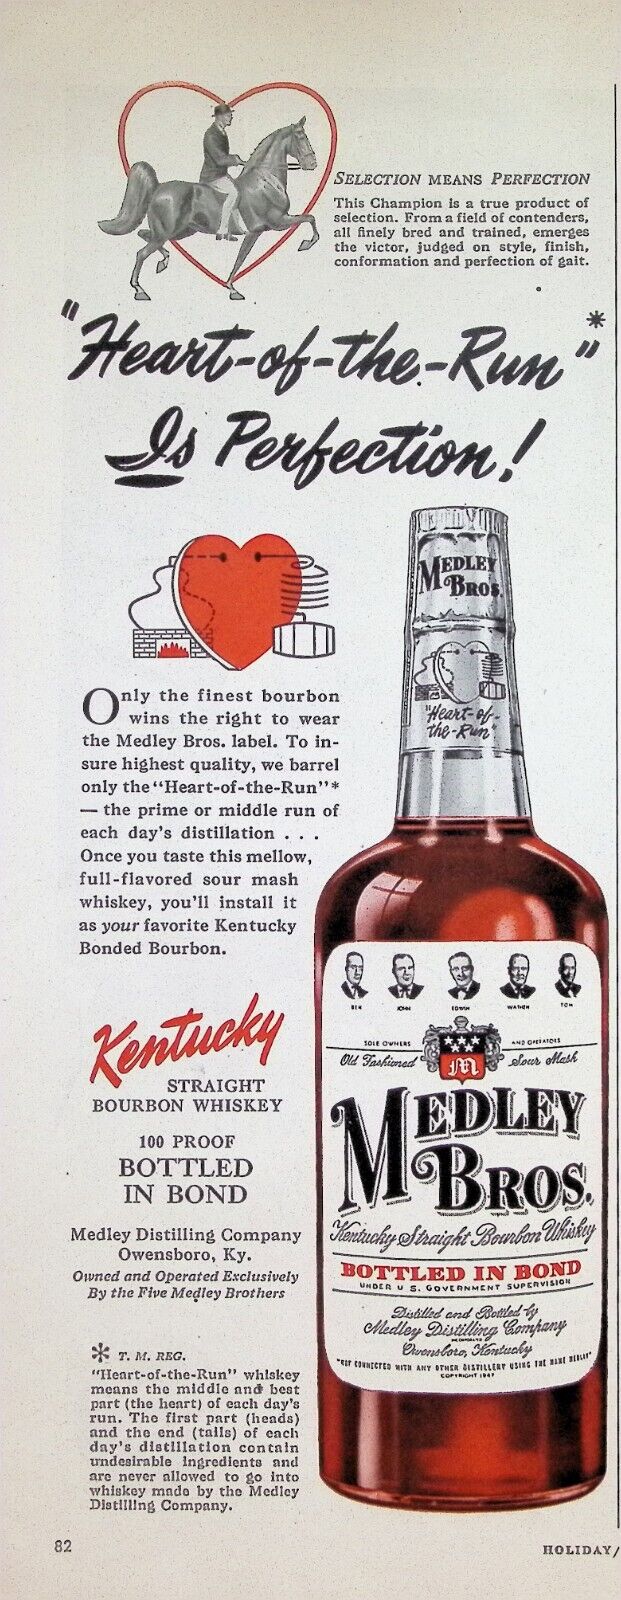 VINTAGE 1950s Print Ad ~ Medley Bros Kentucky Whiskey ~ Heart-of-the-Rum